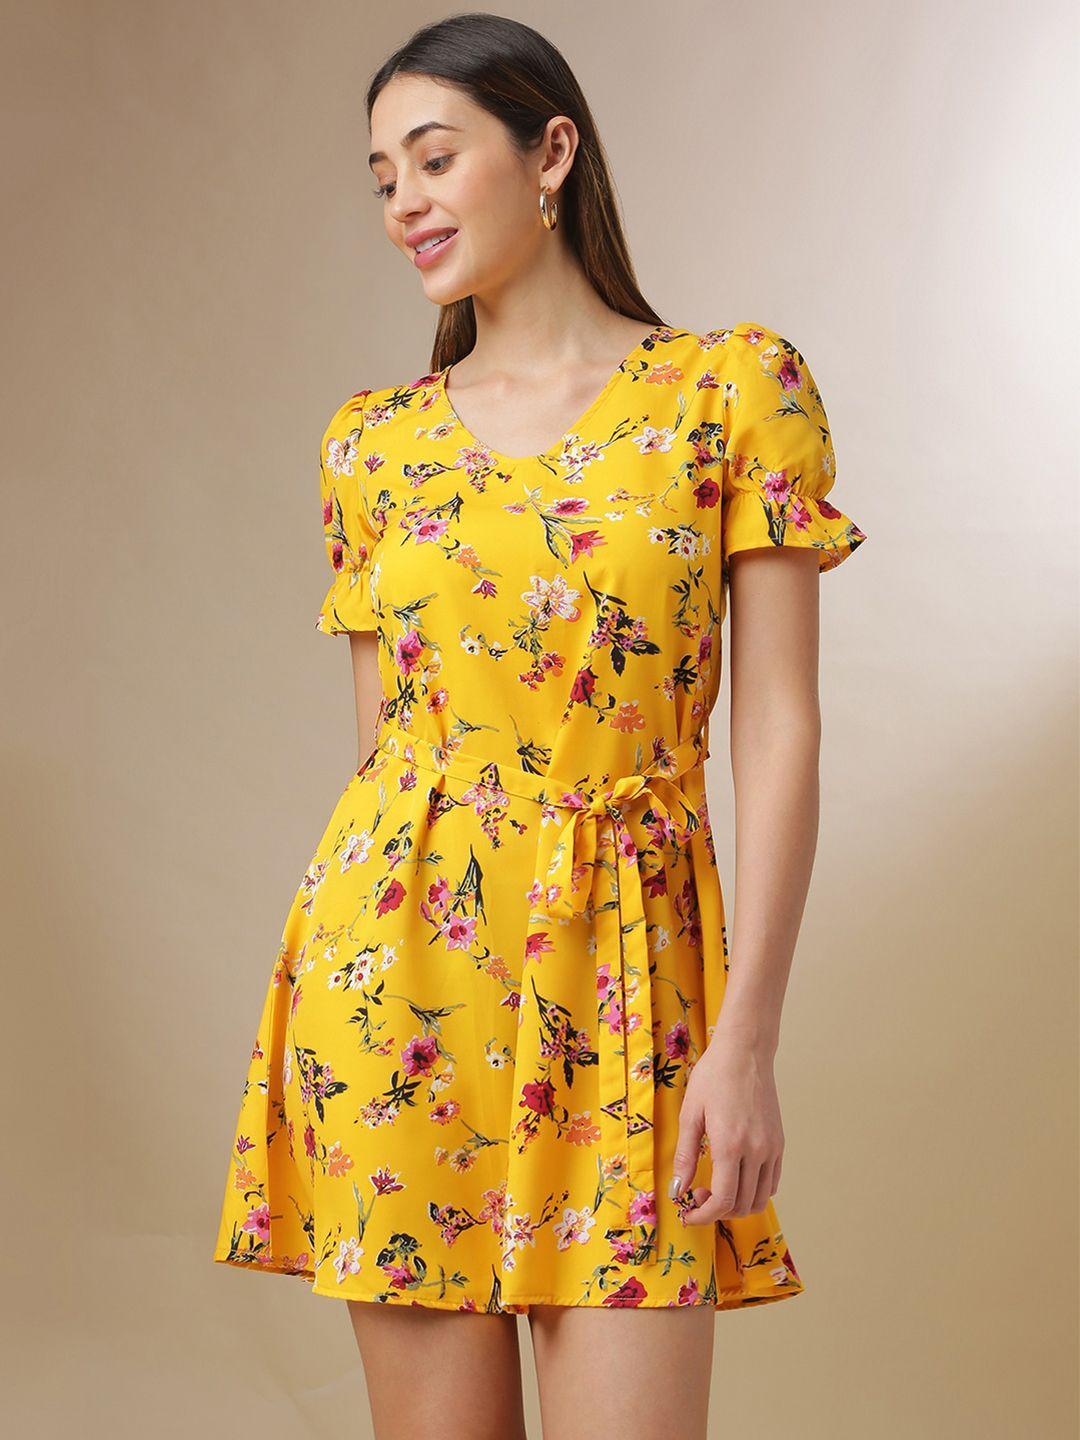 campus sutra yellow floral dress